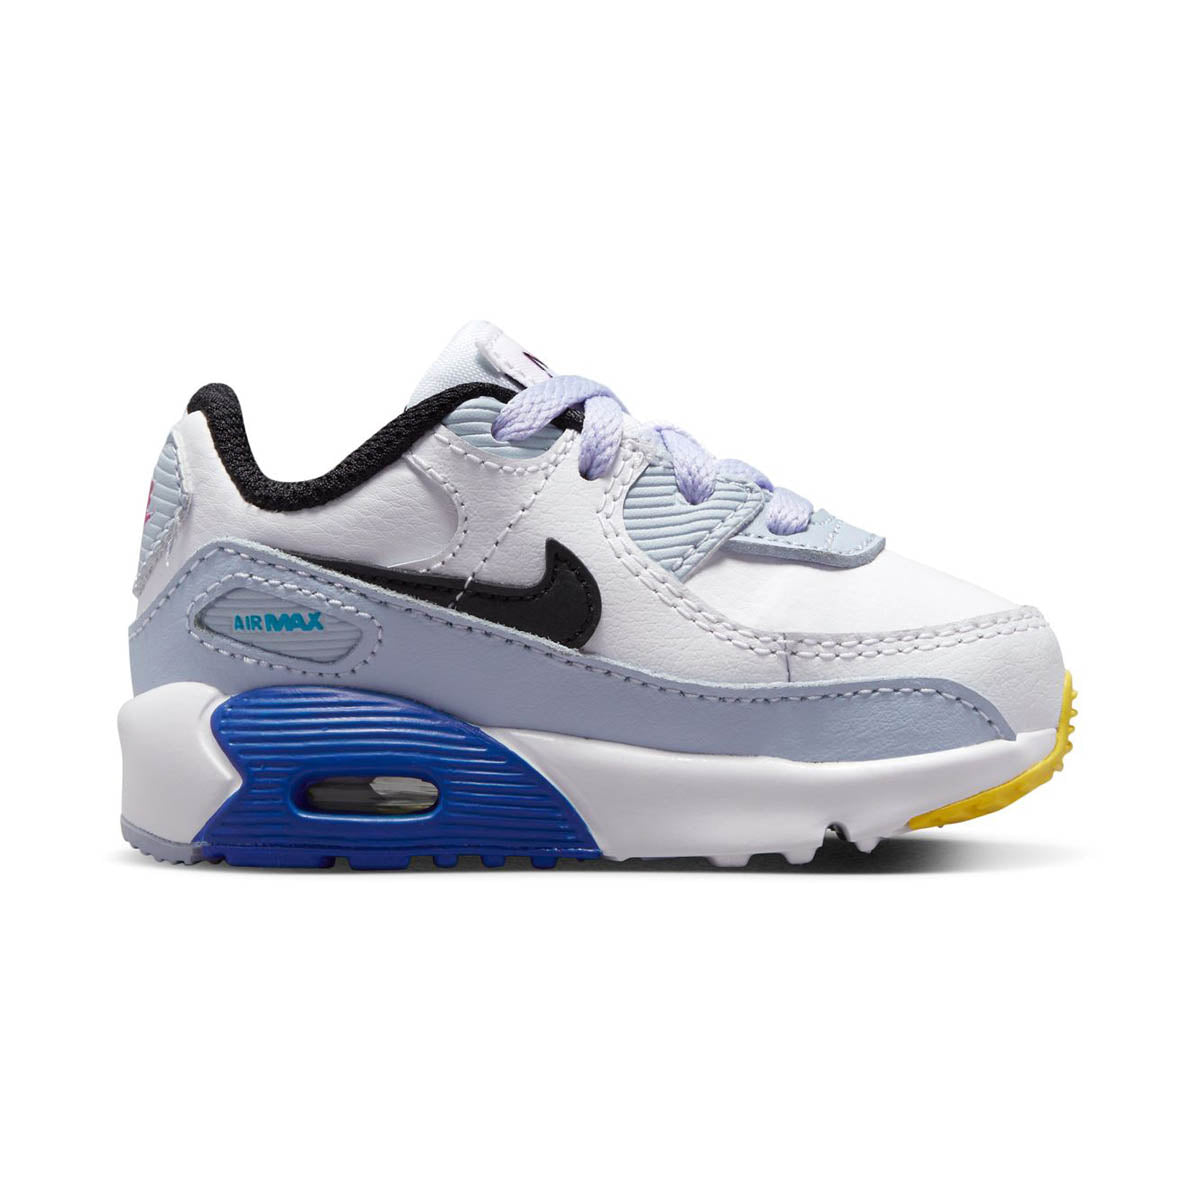 Nike Air Max 90 LTR Baby/Toddler Shoes - Millennium